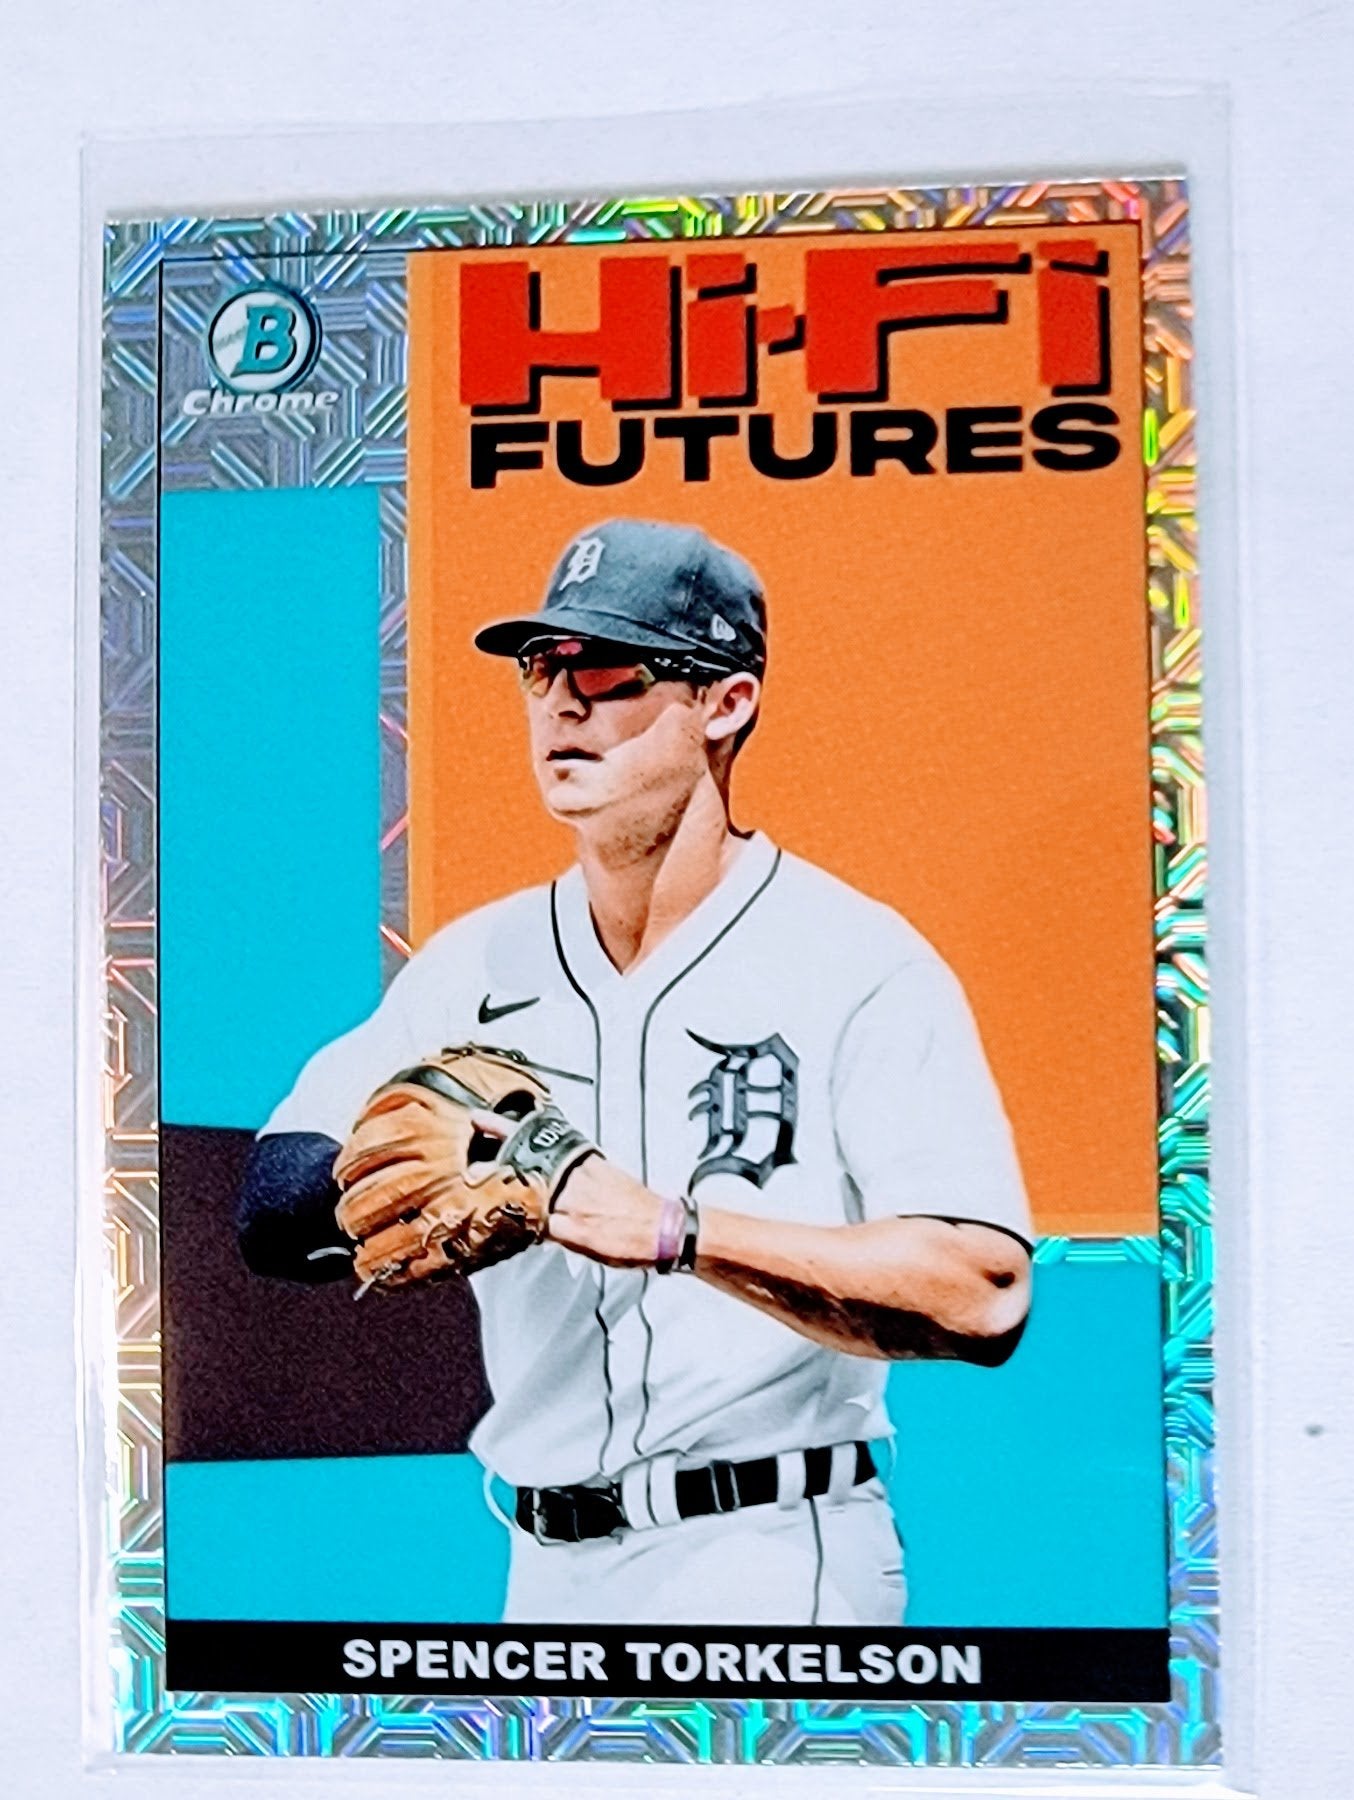 2022 Bowman Chrome Spencer Torkelson Hi-Fi Futures Mojo Refractor Baseball Trading Card SMCB1 simple Xclusive Collectibles   